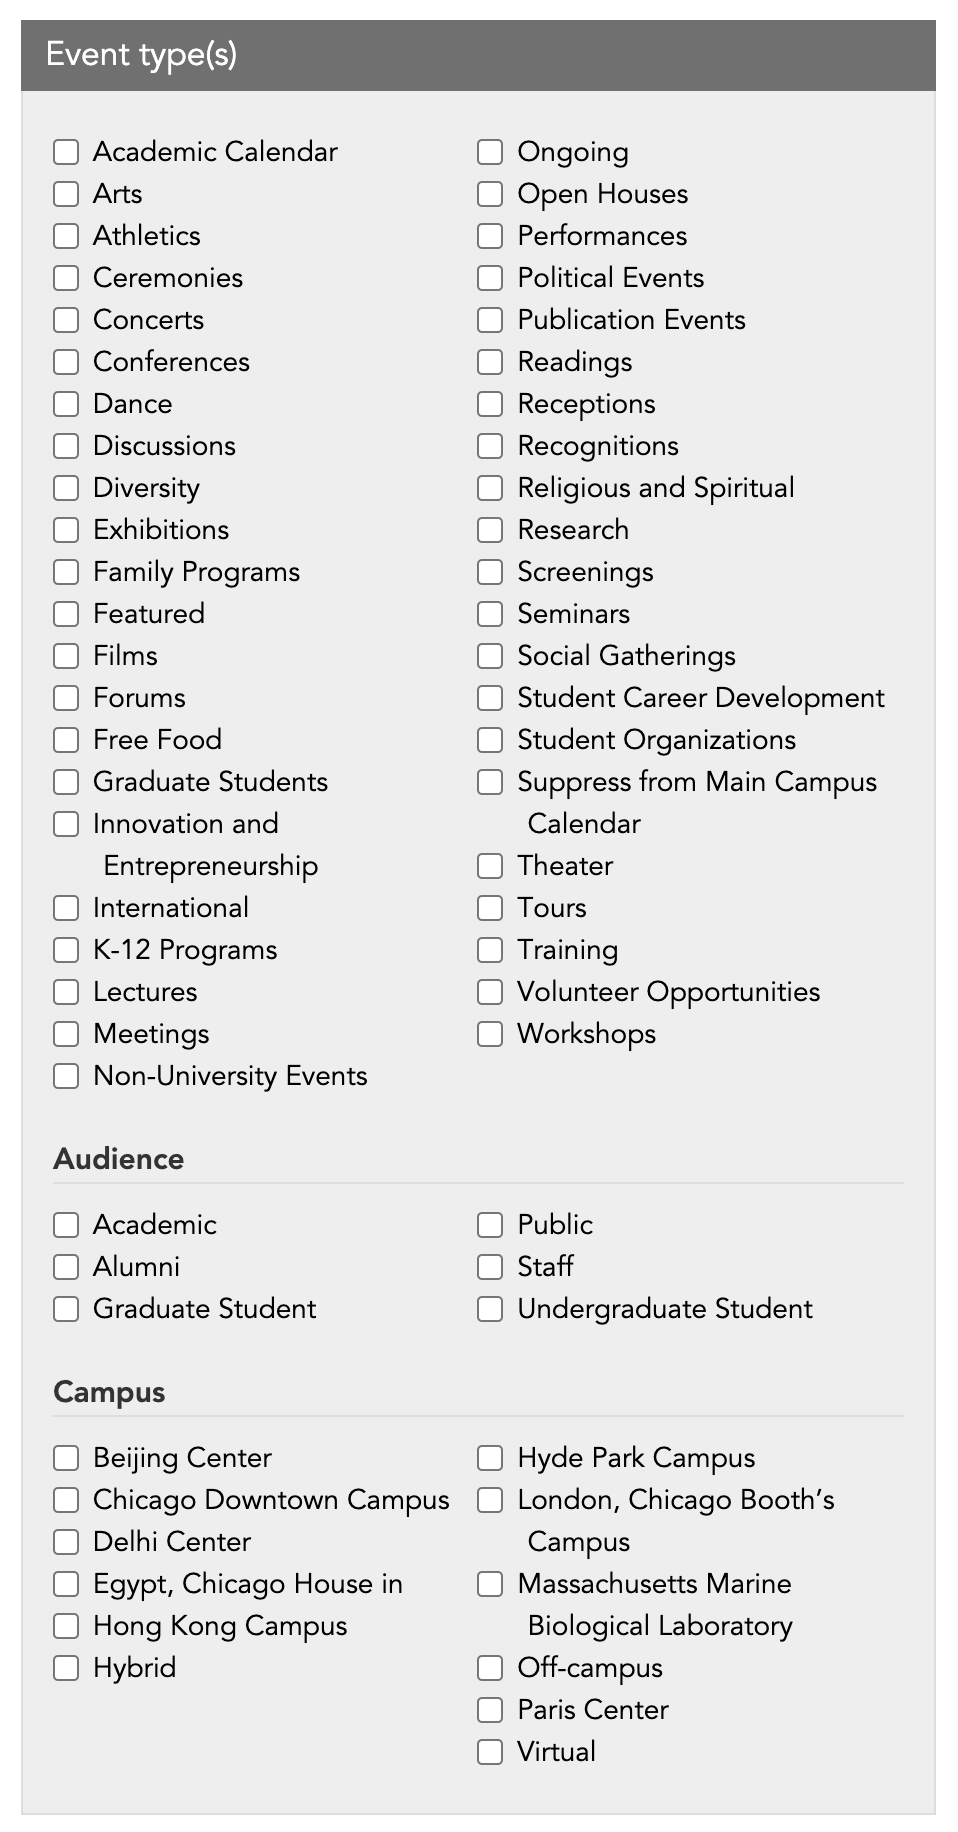 Event types, including target audience and campus